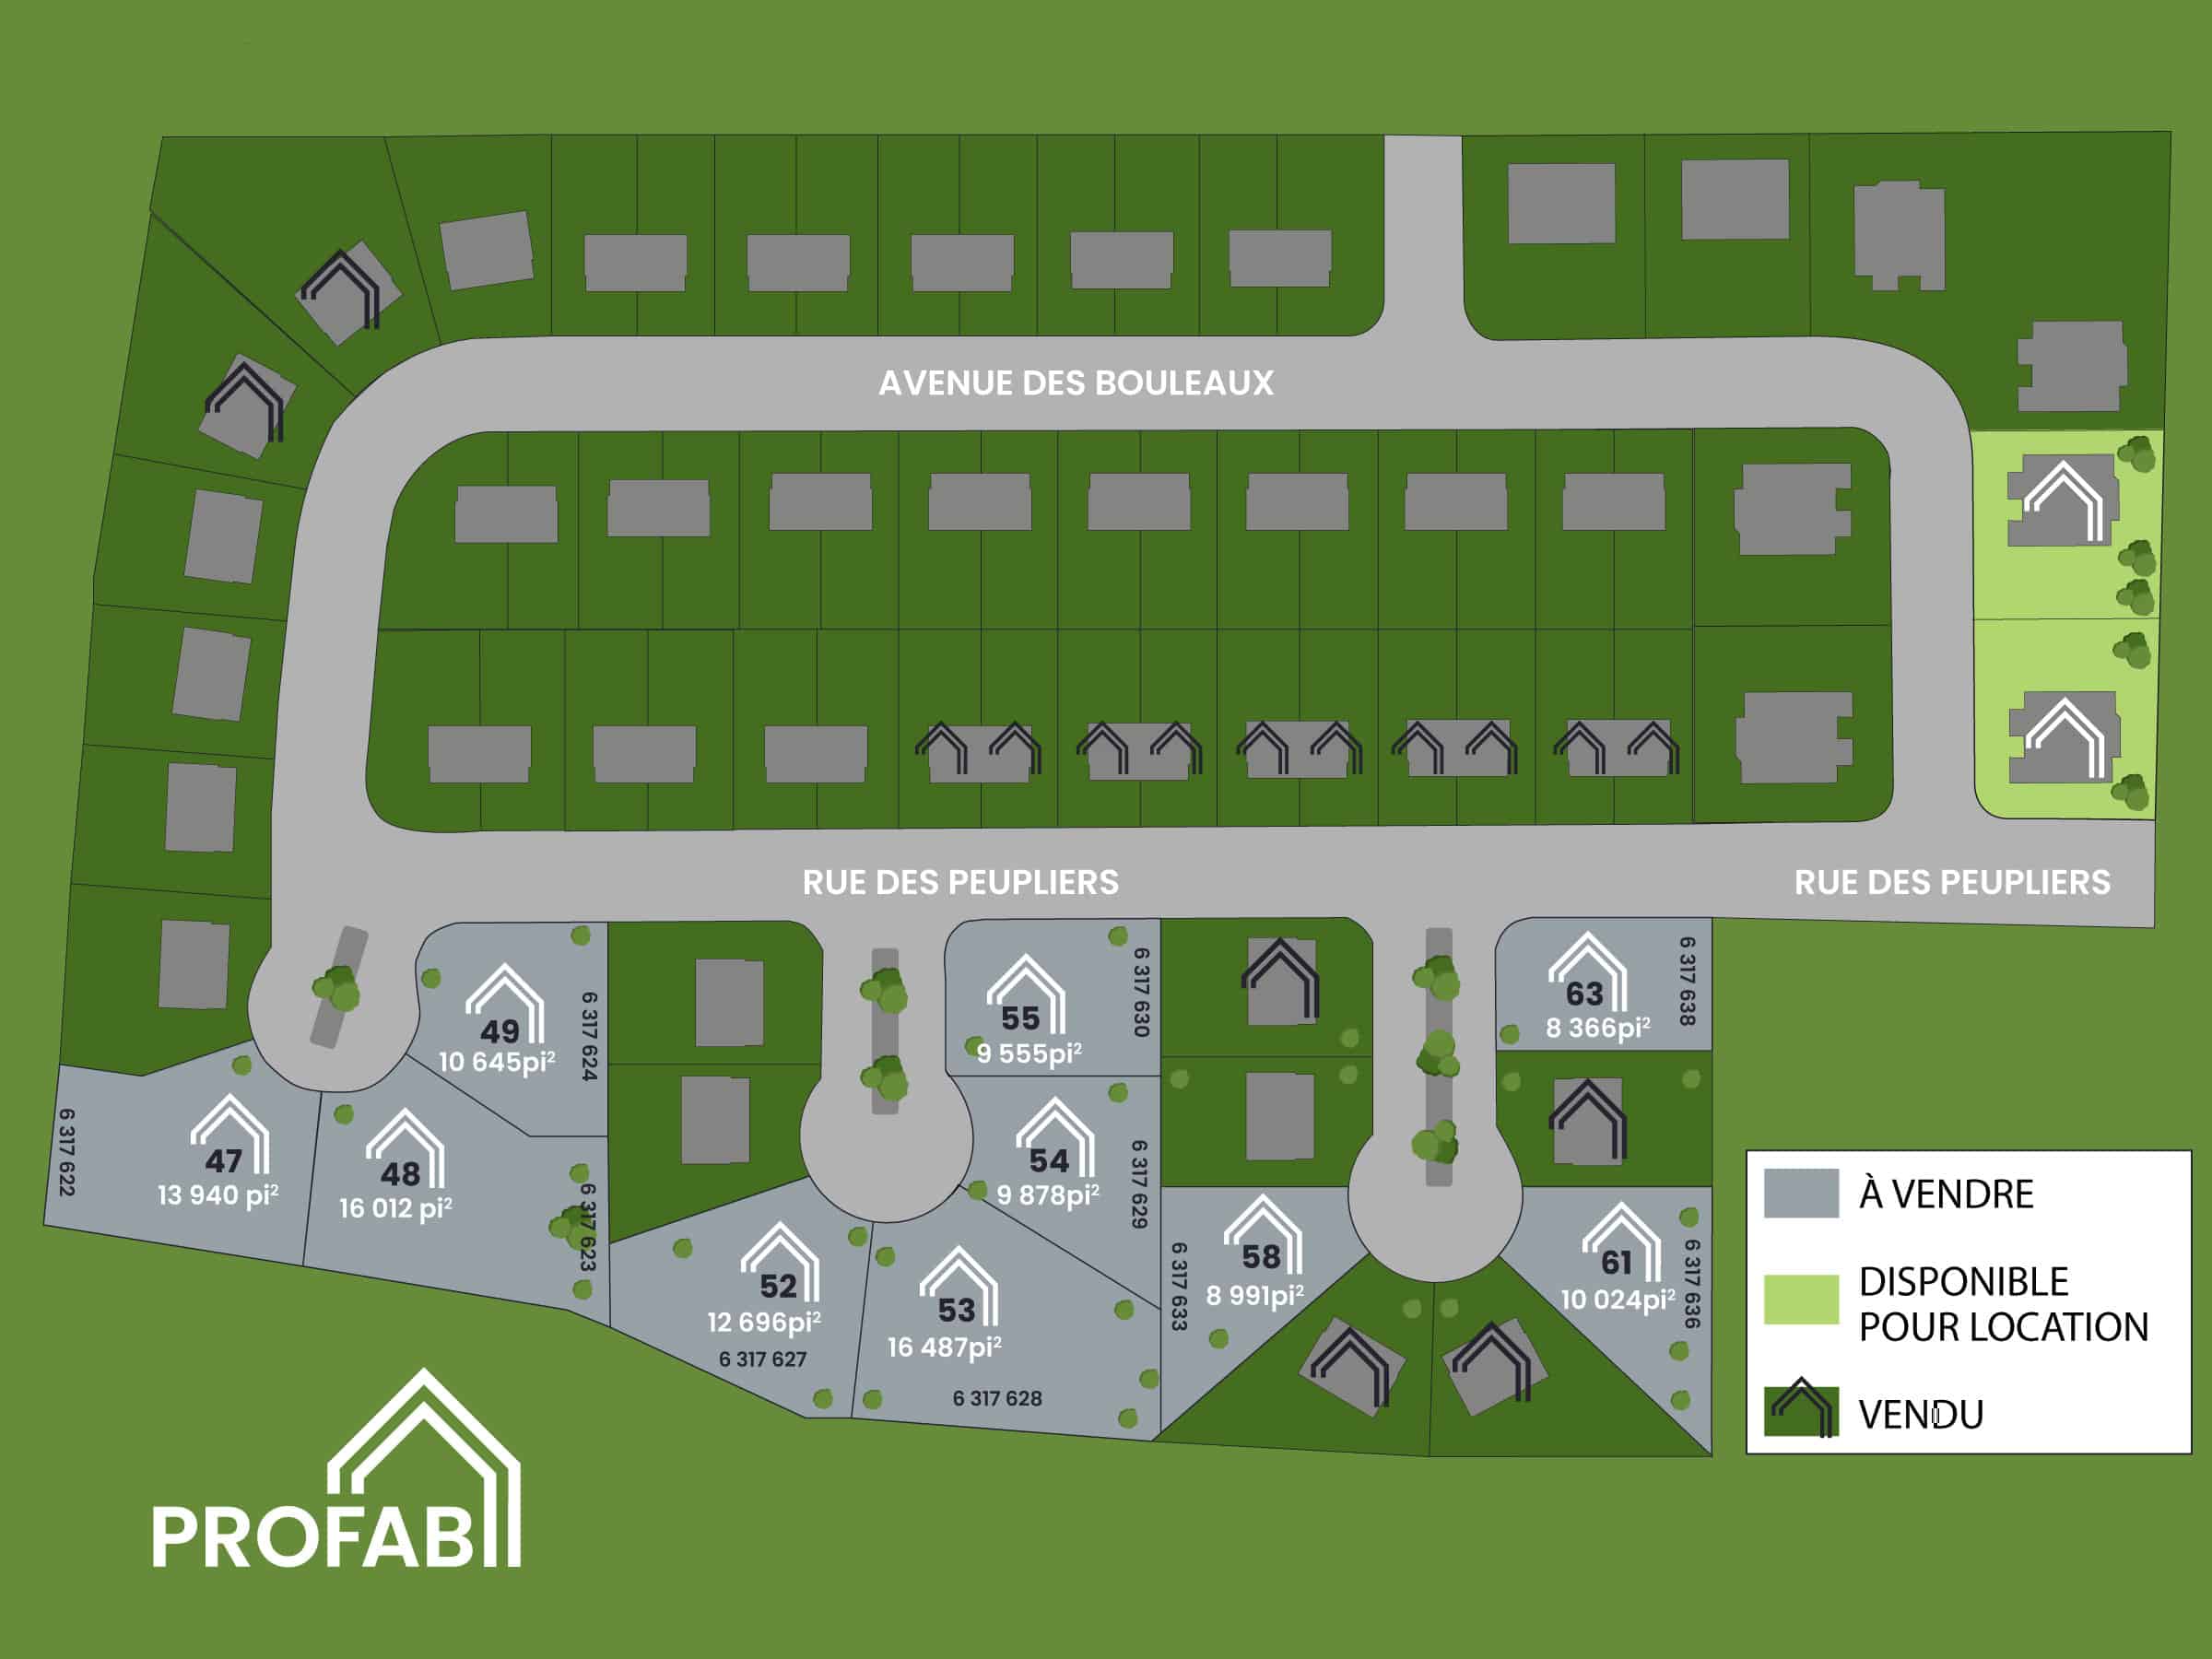 Vallée jonction 2D subdivision plan. Vacant lot number 53 for sale.